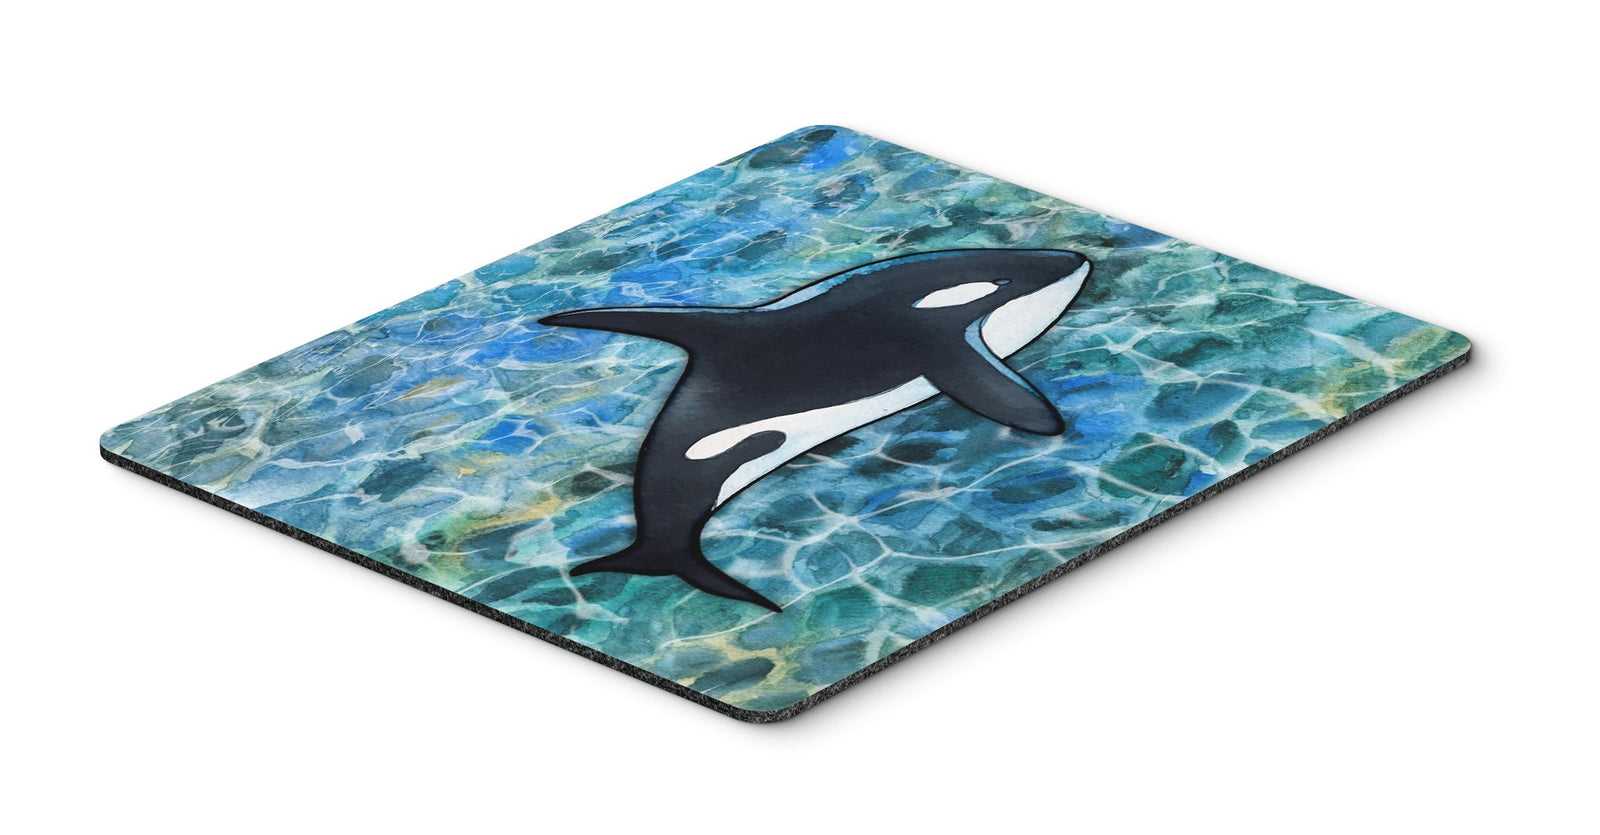 Killer Whale Orca Mouse Pad, Hot Pad or Trivet BB5348MP by Caroline's Treasures